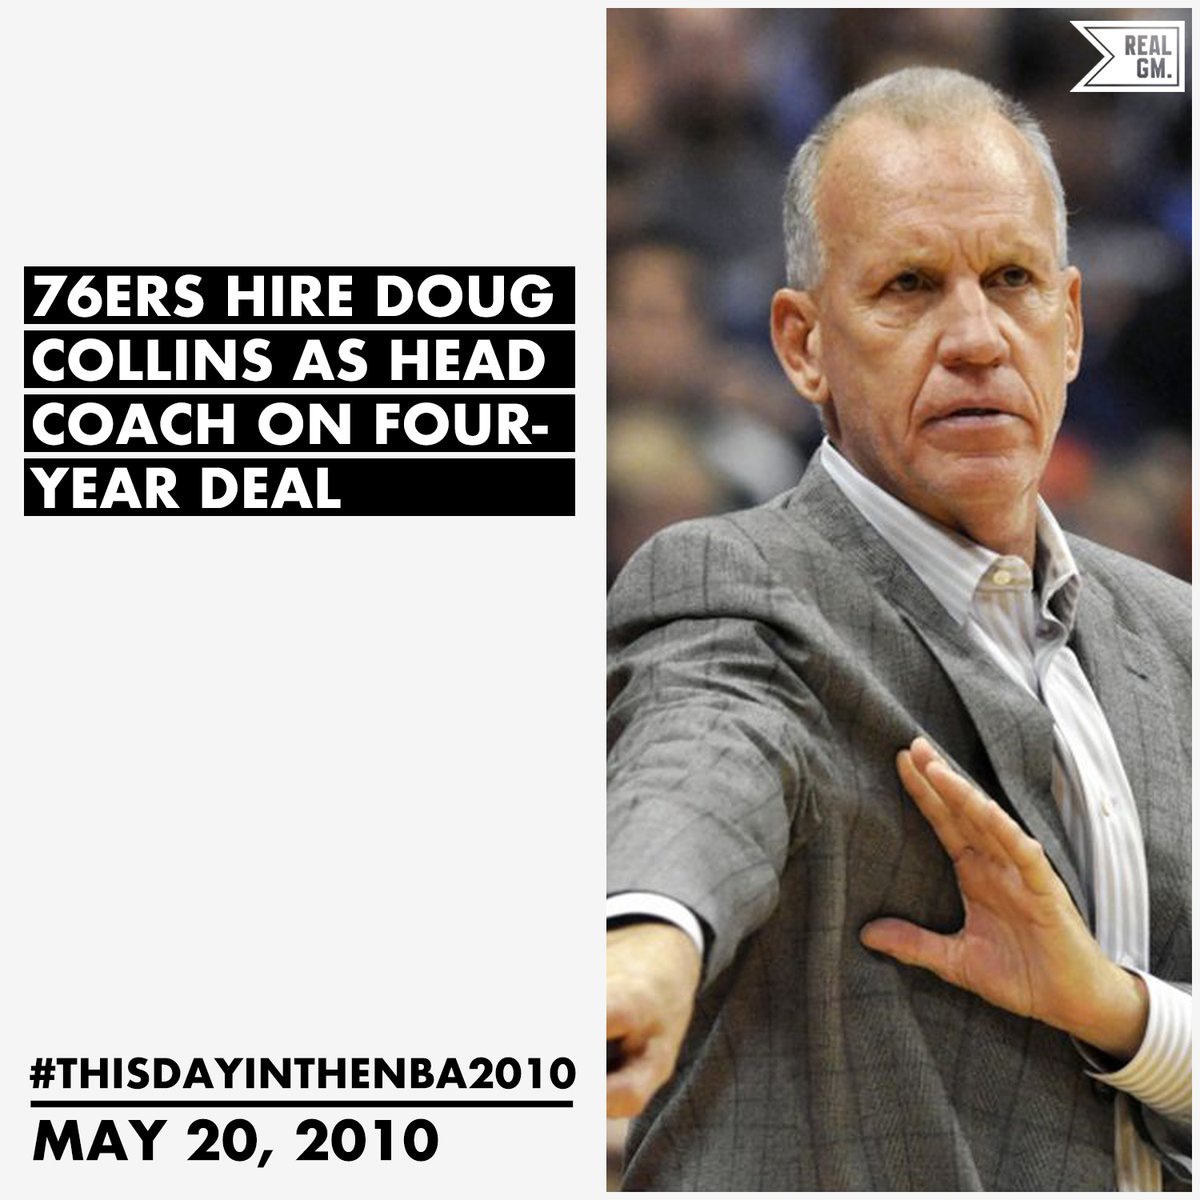  #ThisDayInTheNBA2010May 20, 201076ers Hire Doug Collins As Head Coach On Four-Year Deal https://basketball.realgm.com/wiretap/204023/76ers-Hire-Doug-Collins-As-Head-Coach-On-Four-Year-Deal